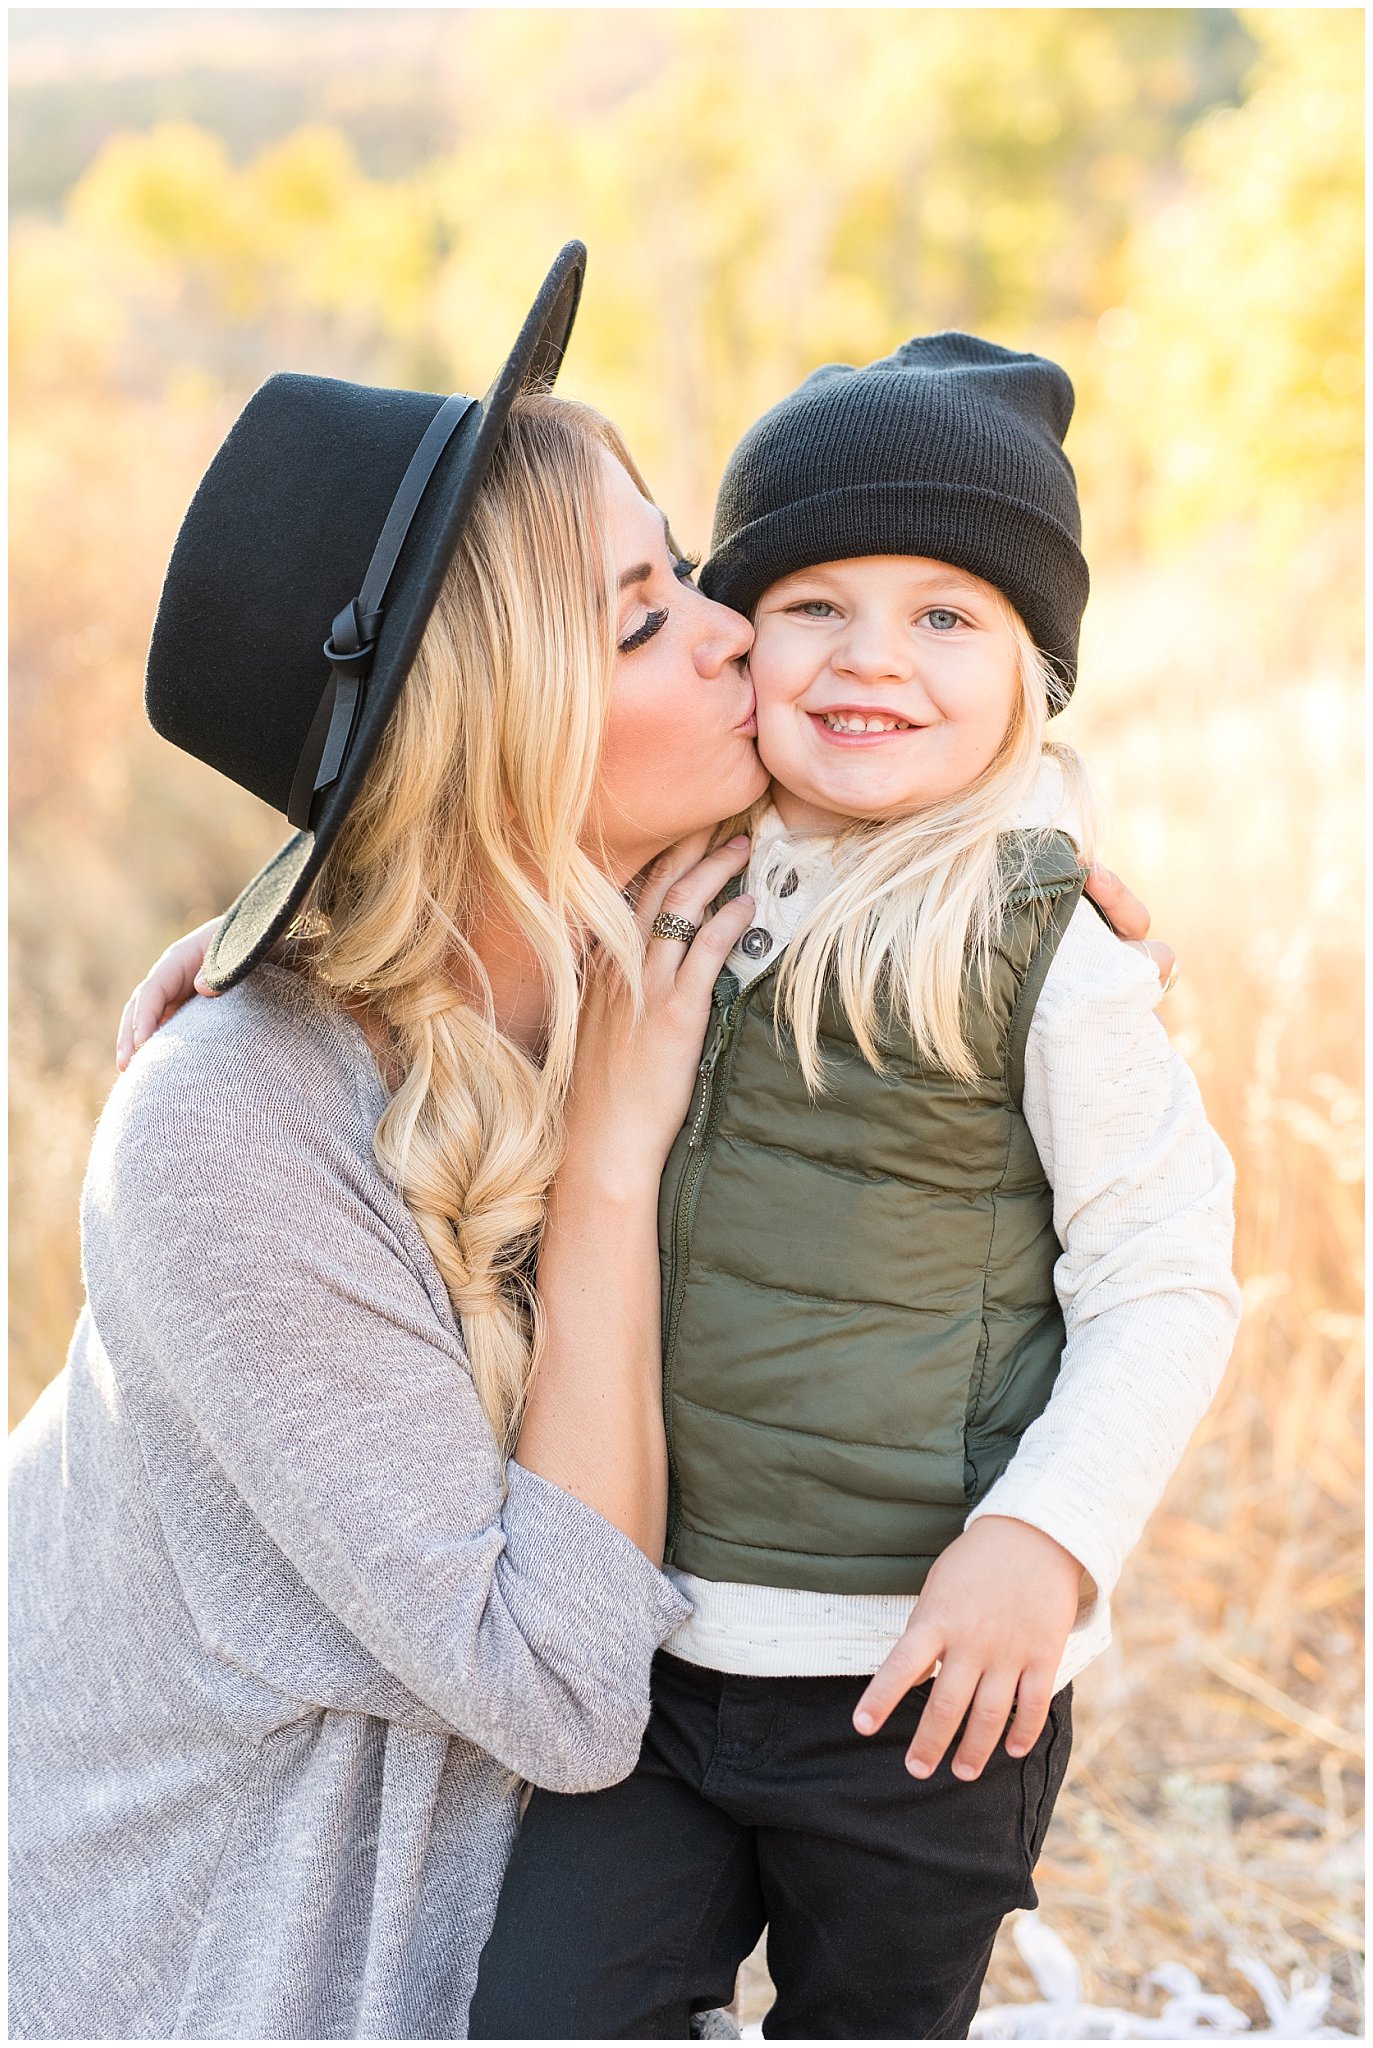 Mom kissing son on the cheek in the mountains | Fall Family Pictures in the Mountains | Snowbasin, Utah | Jessie and Dallin